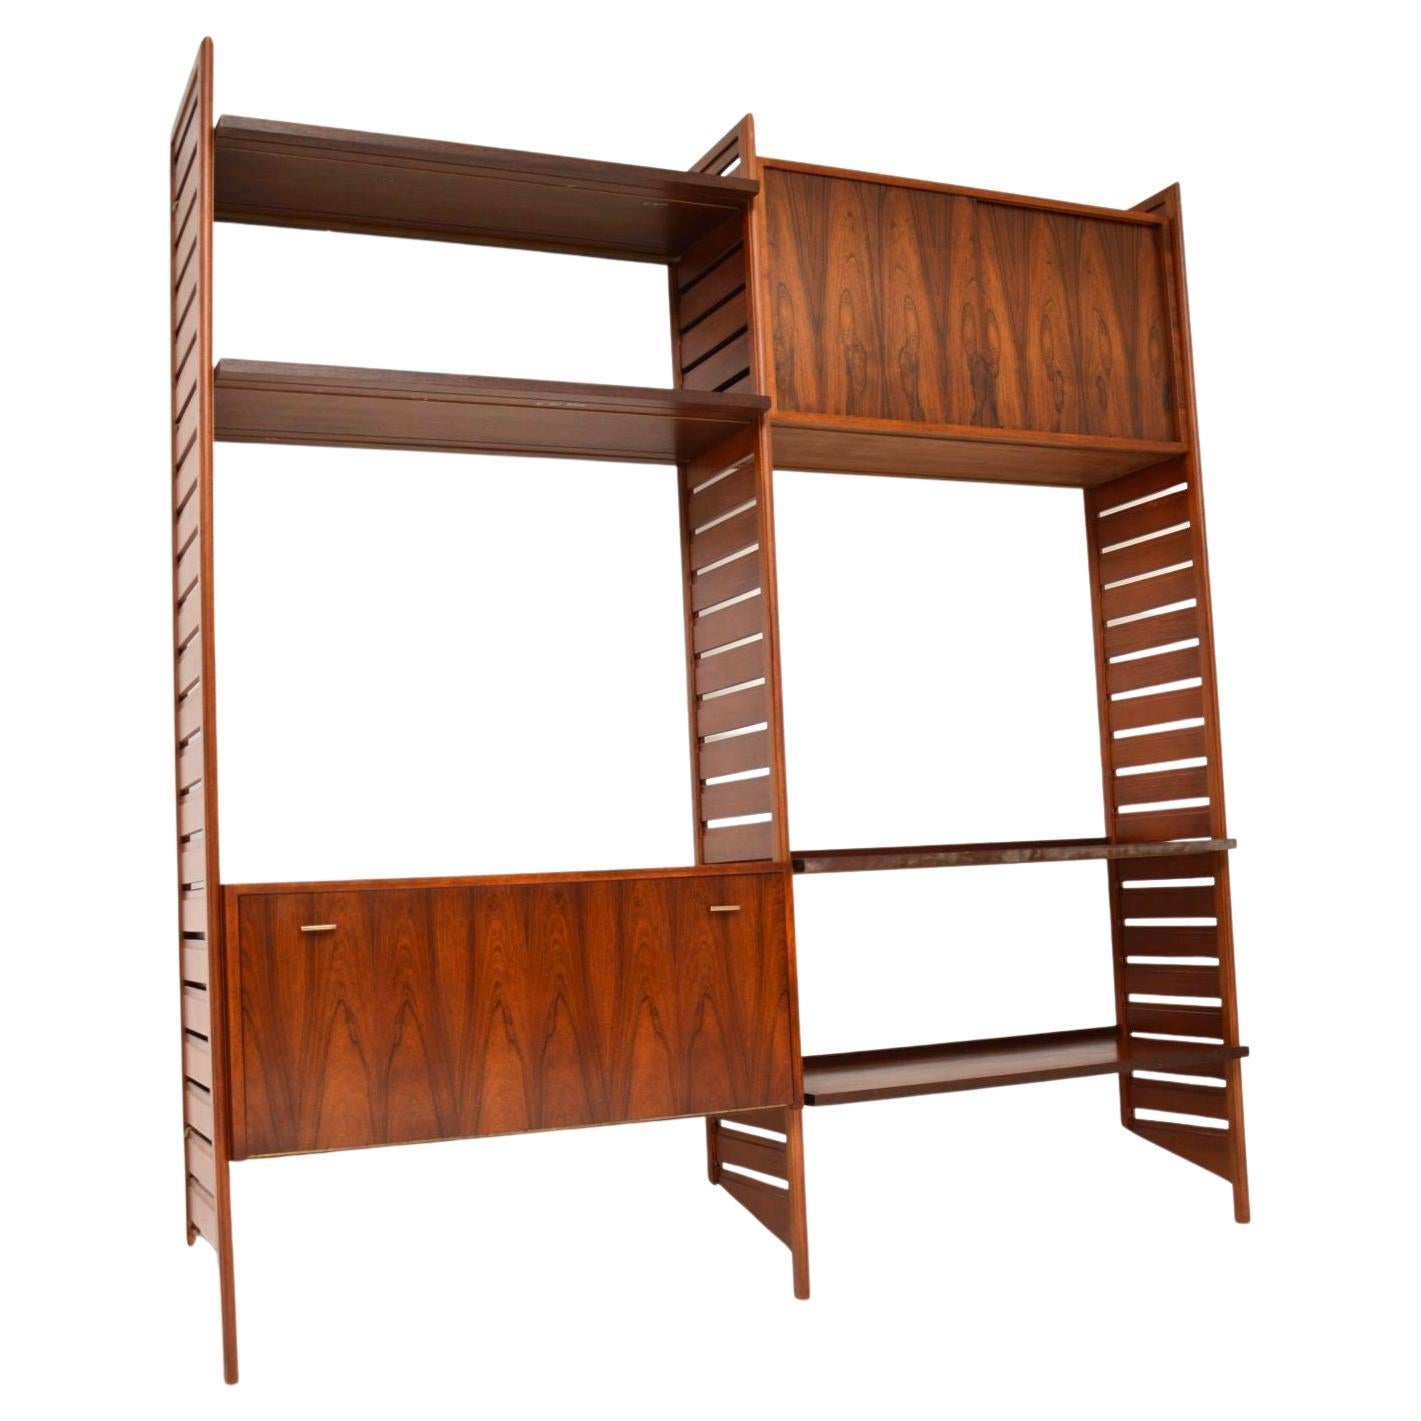 1960's Vintage Ladderax Wall Unit Cabinet / Bookcase